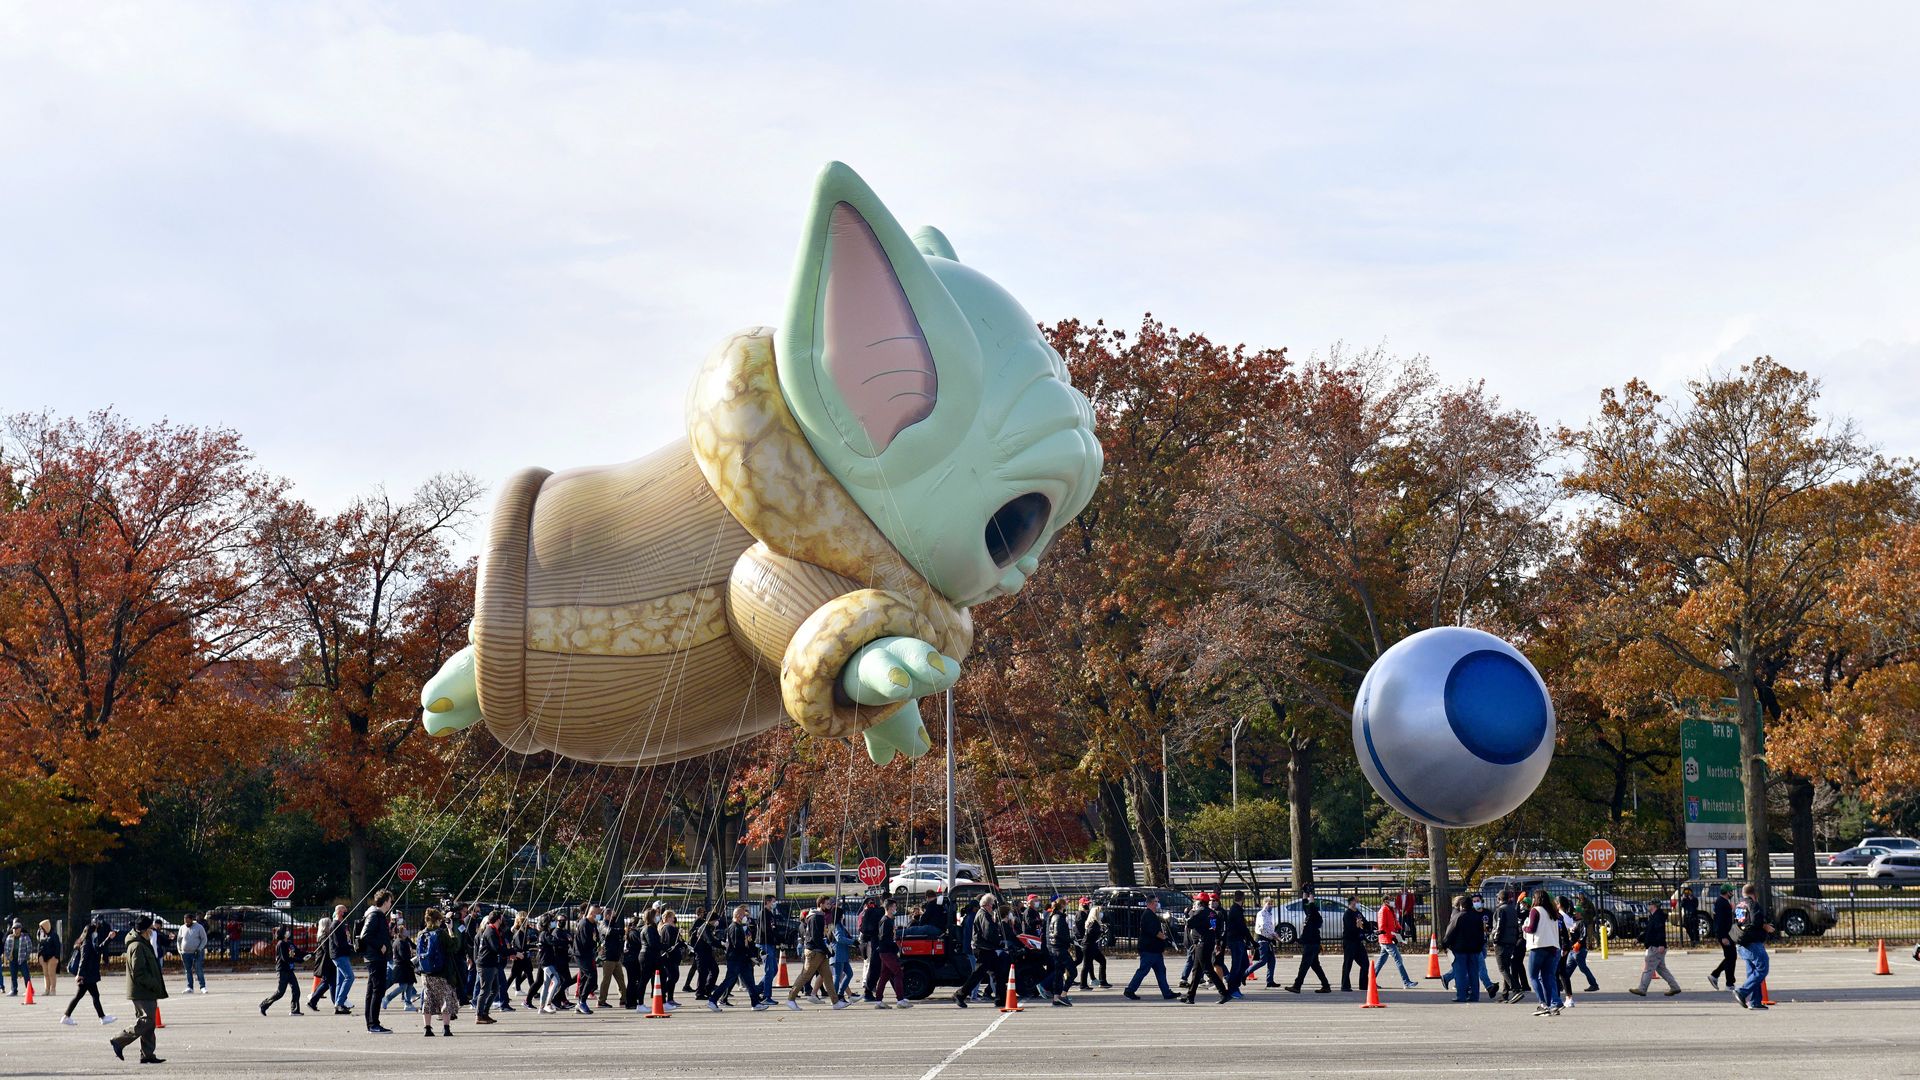 A giant inflated balloon for the Macy's Thanksgiving Day Parade in the shape of Grogu (a.k.a. Baby Yoda in pop culture).